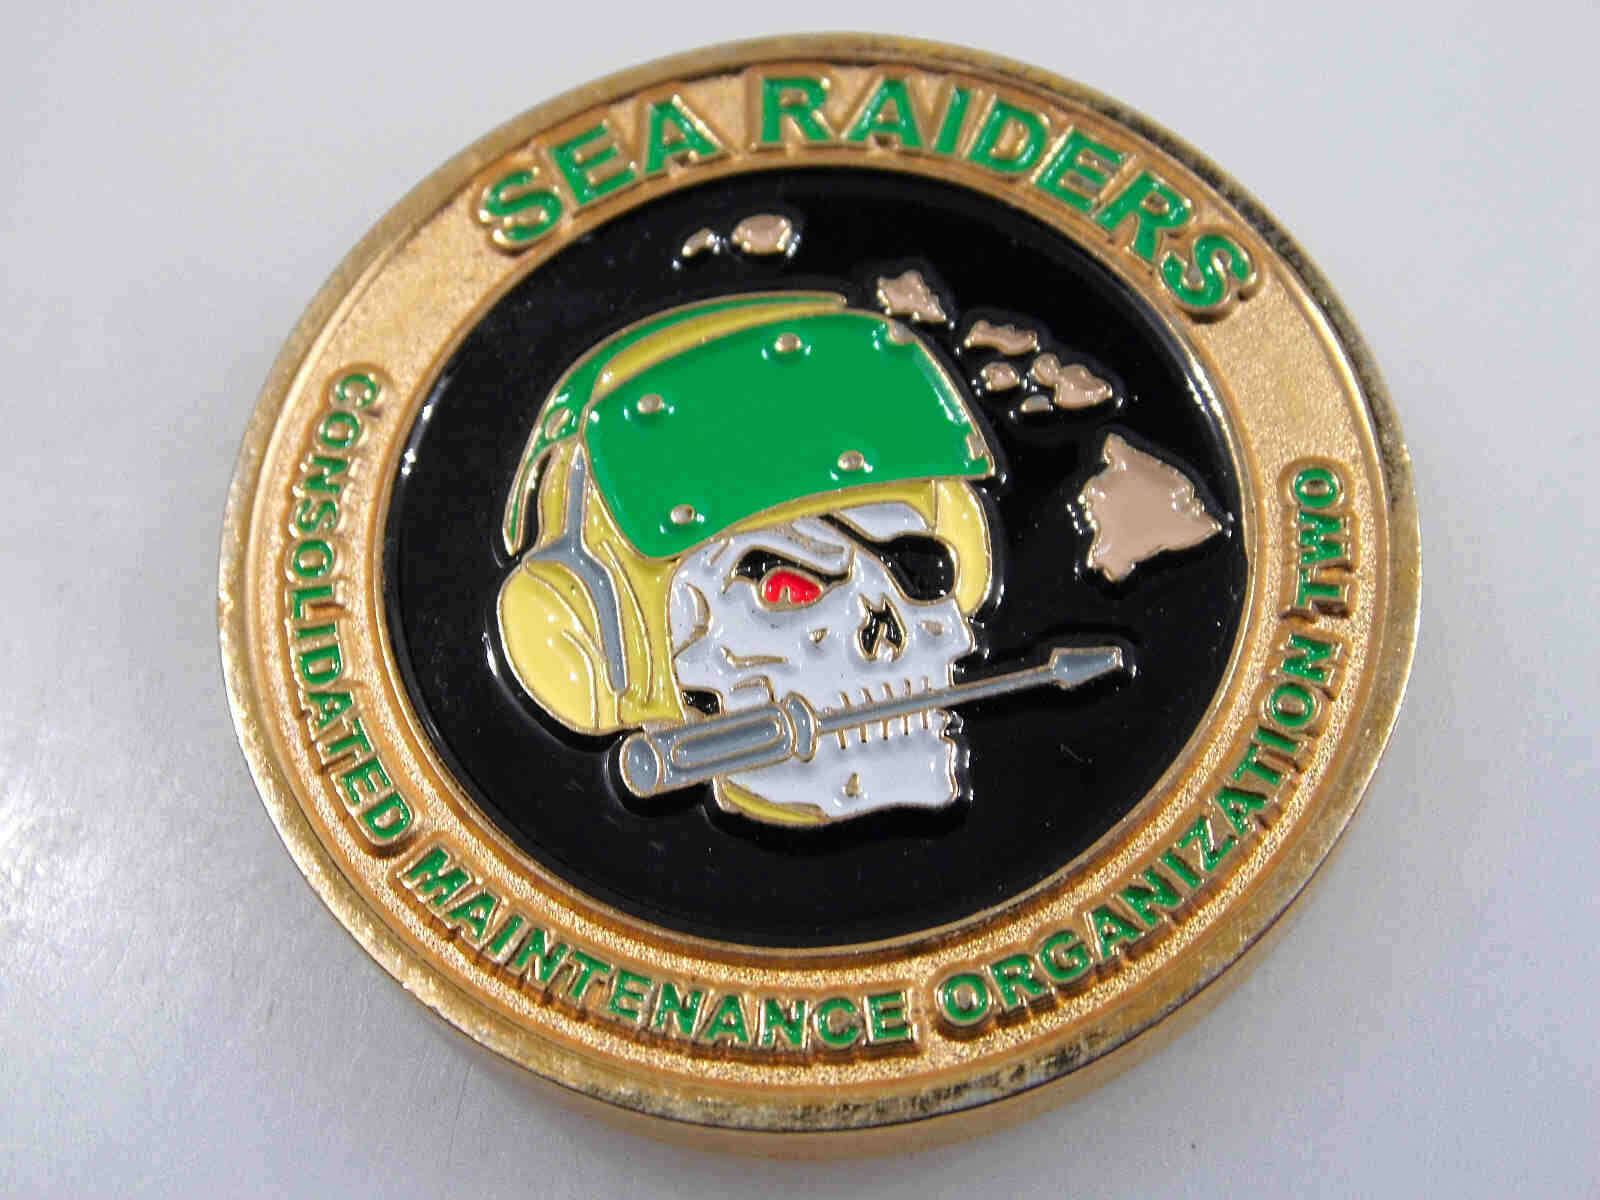 SEA RAIDERS CONSOLIDATED MAINTENACE ORGANIZATION TWO CHALLENGE COIN